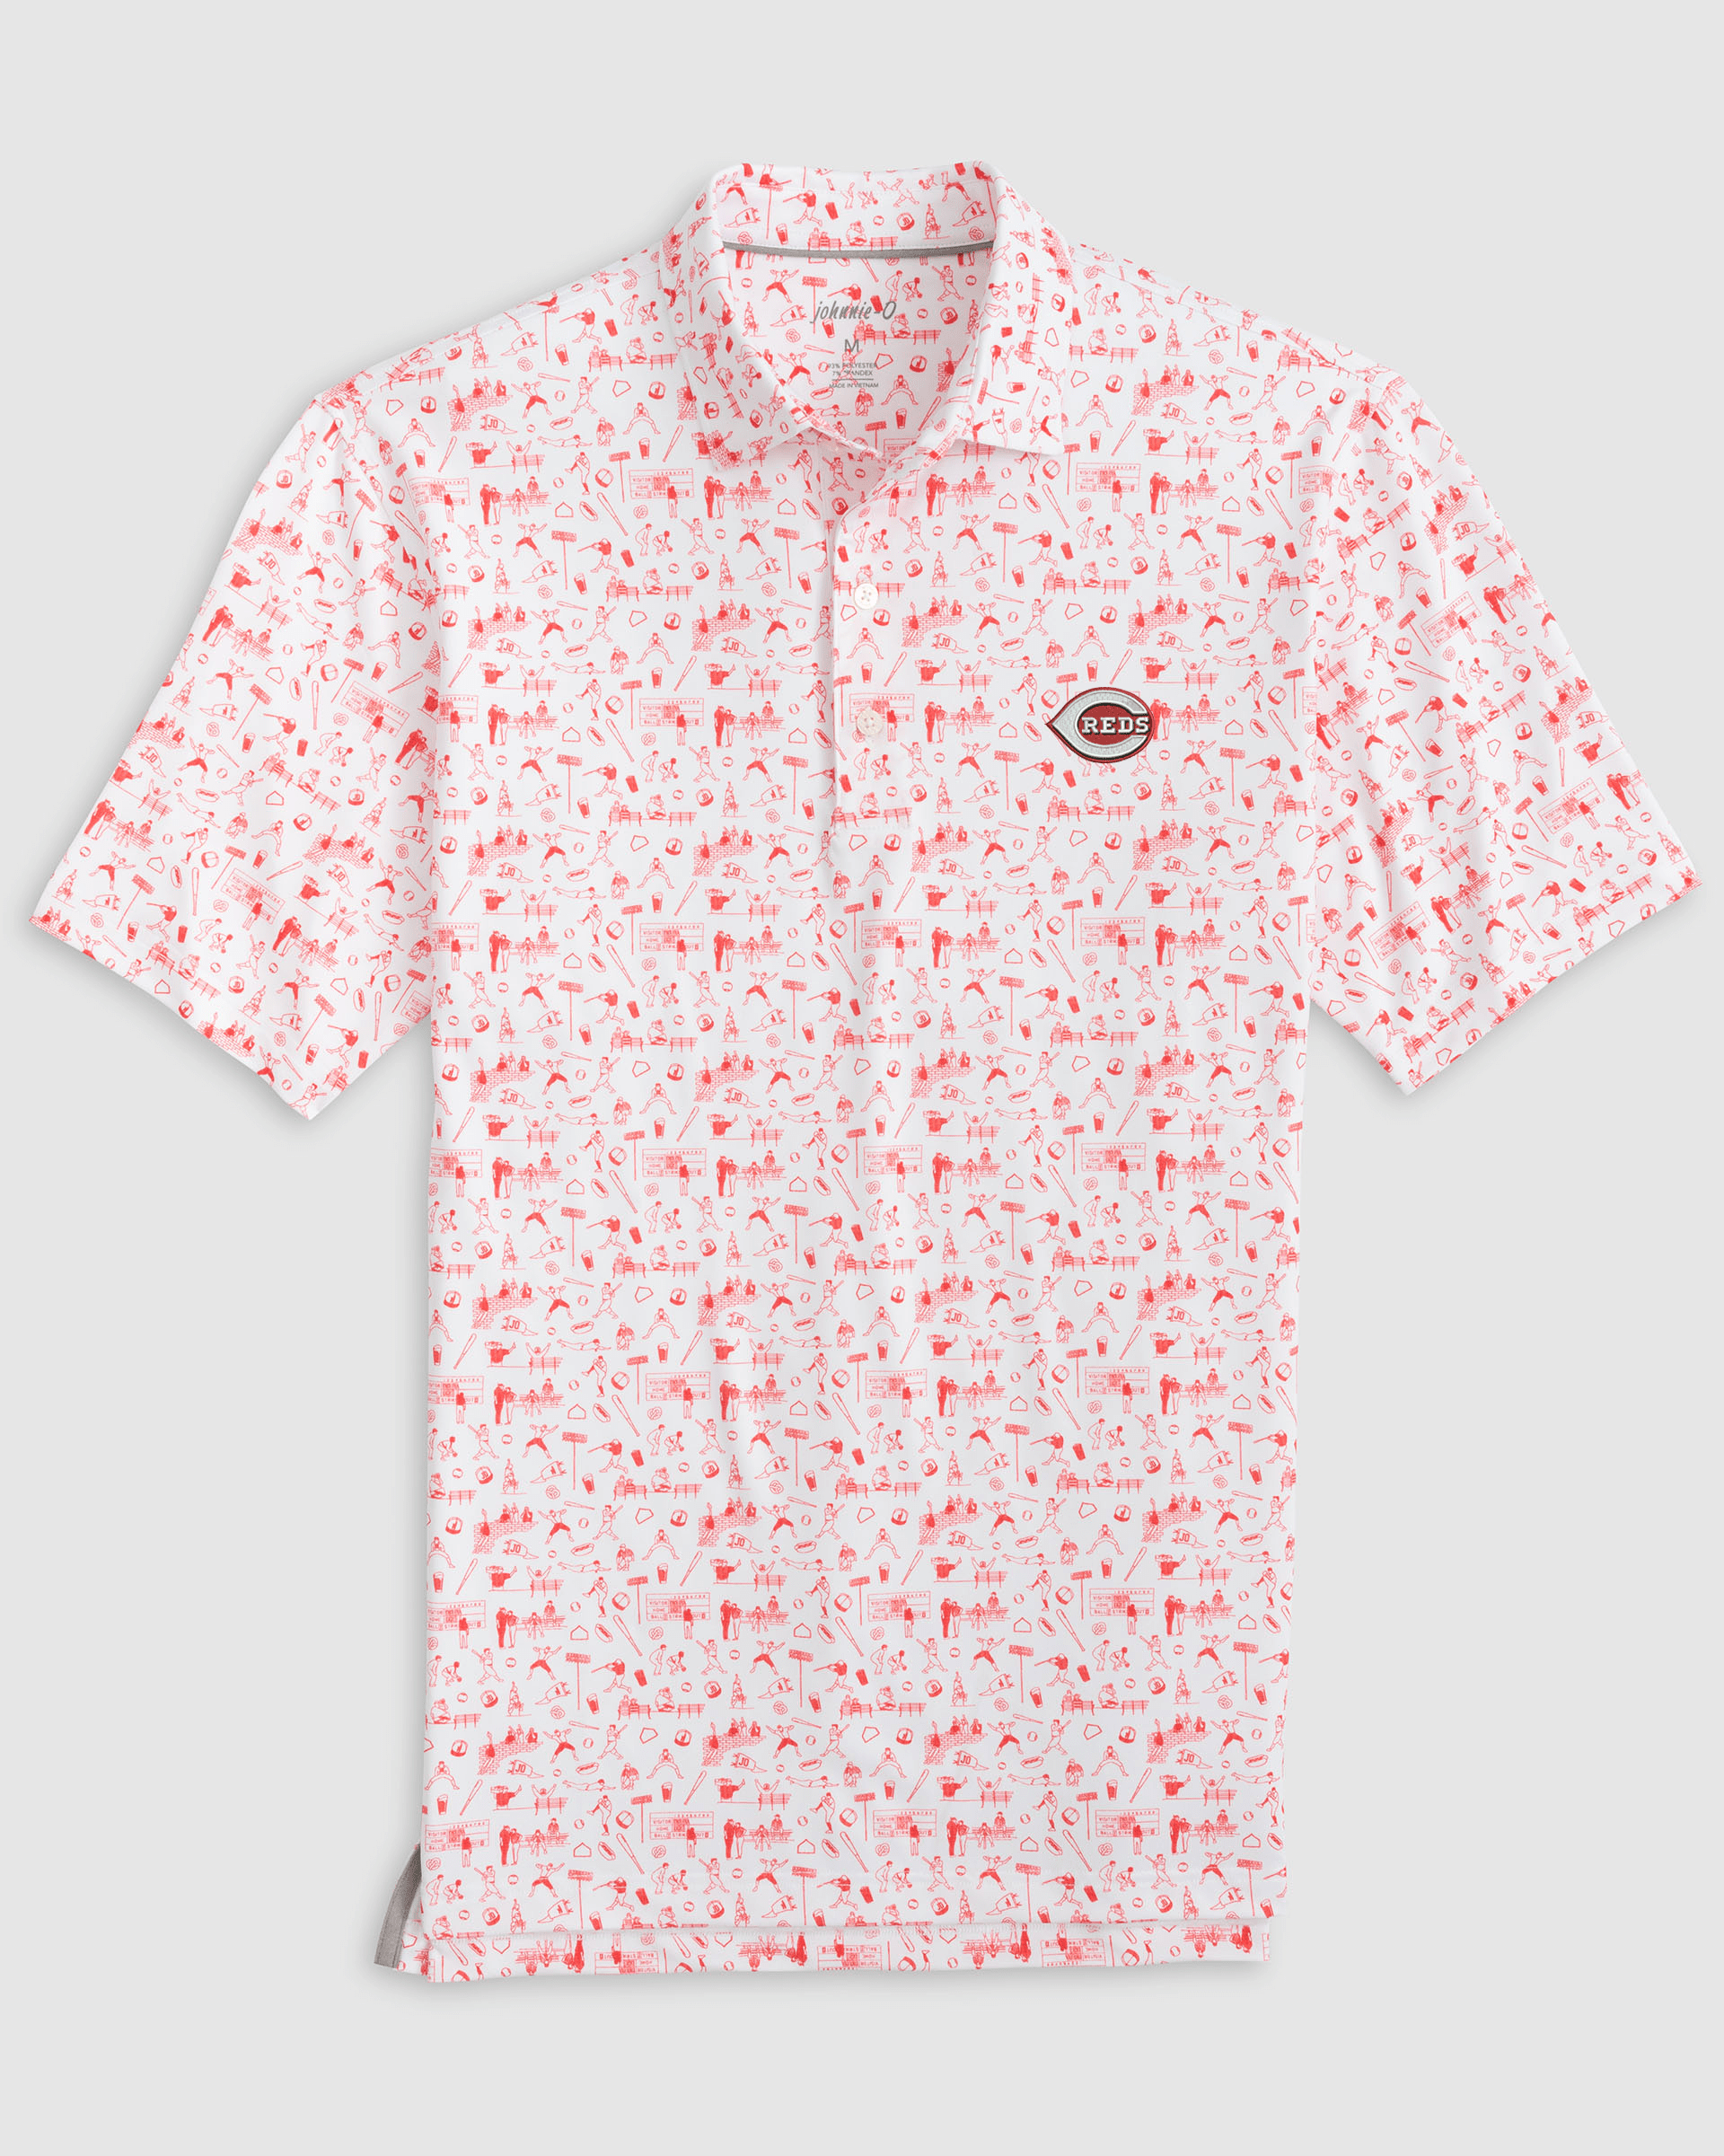 johnnie-O Boston Red Sox Cooperstown Birdie Performance Polo Shirt Button-Down in White